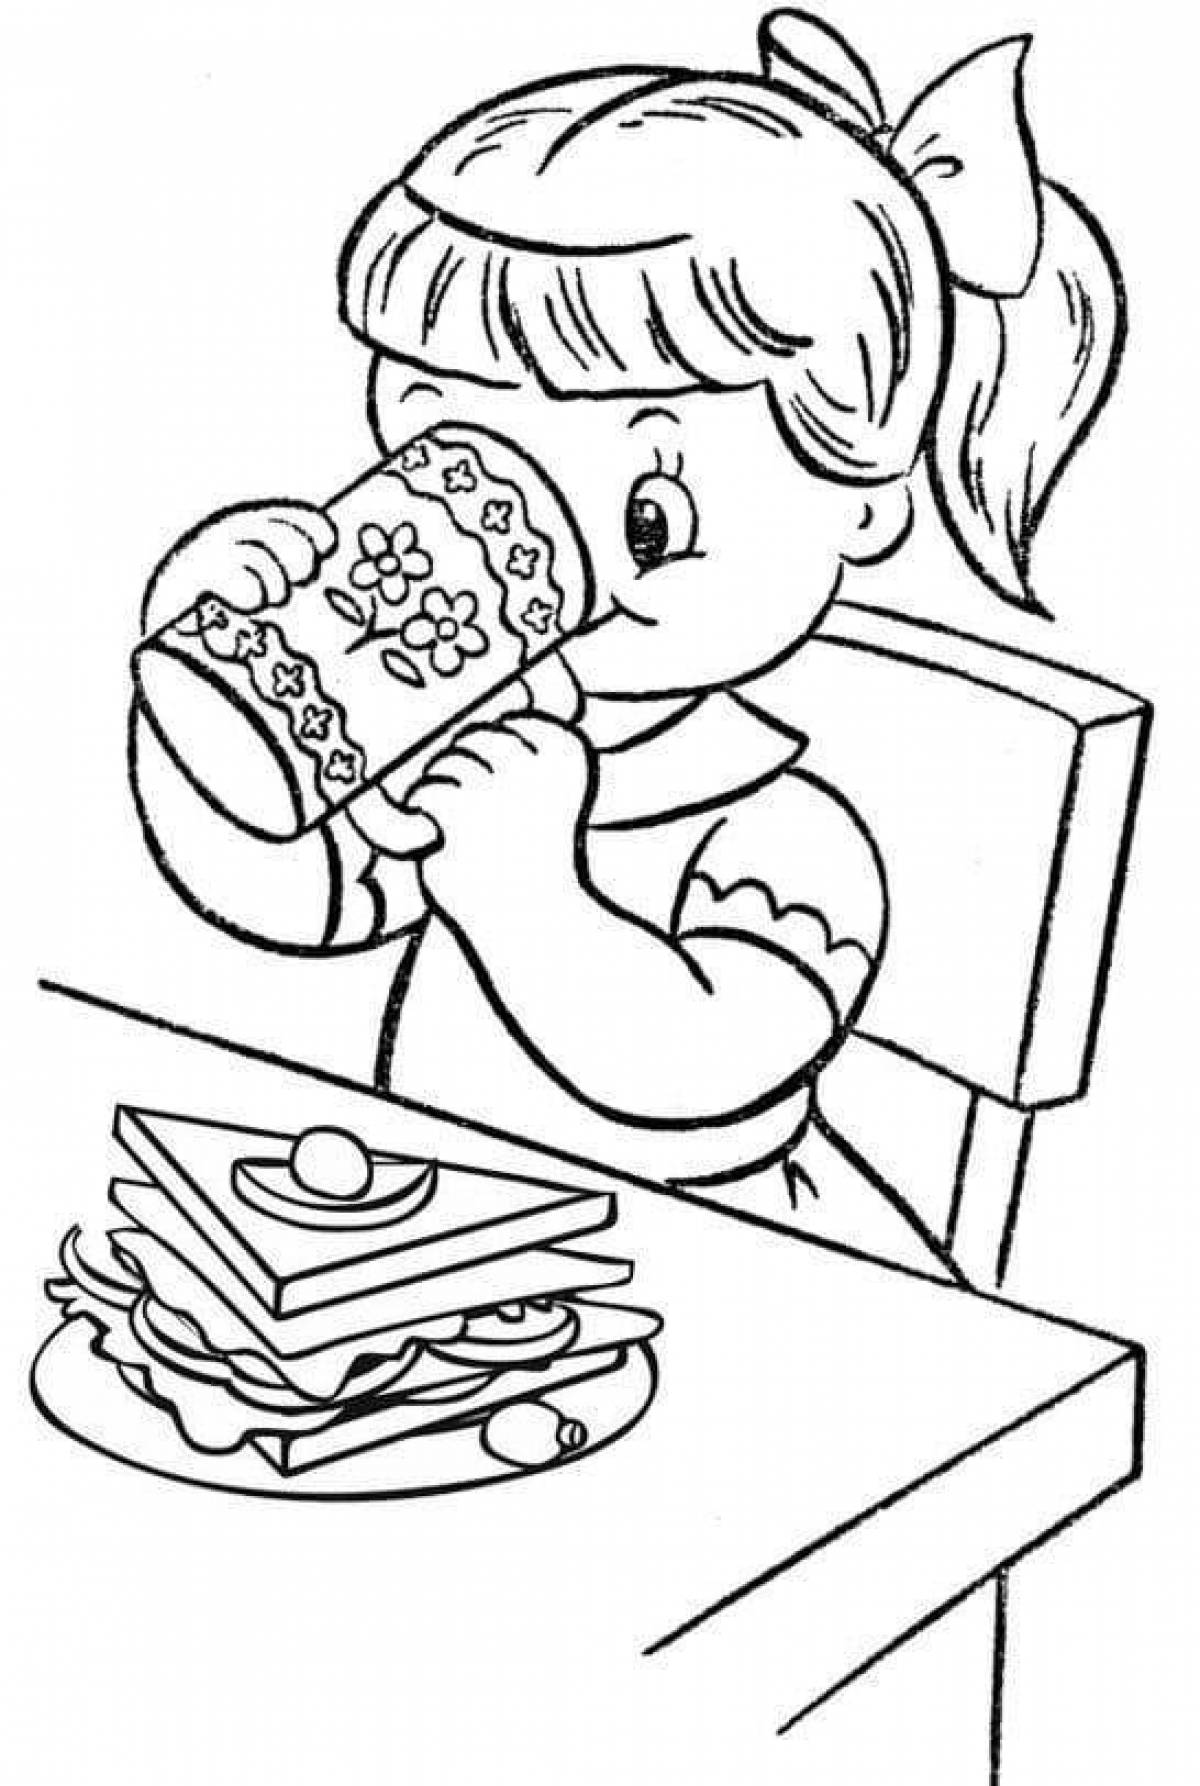 Healthy breakfast coloring page